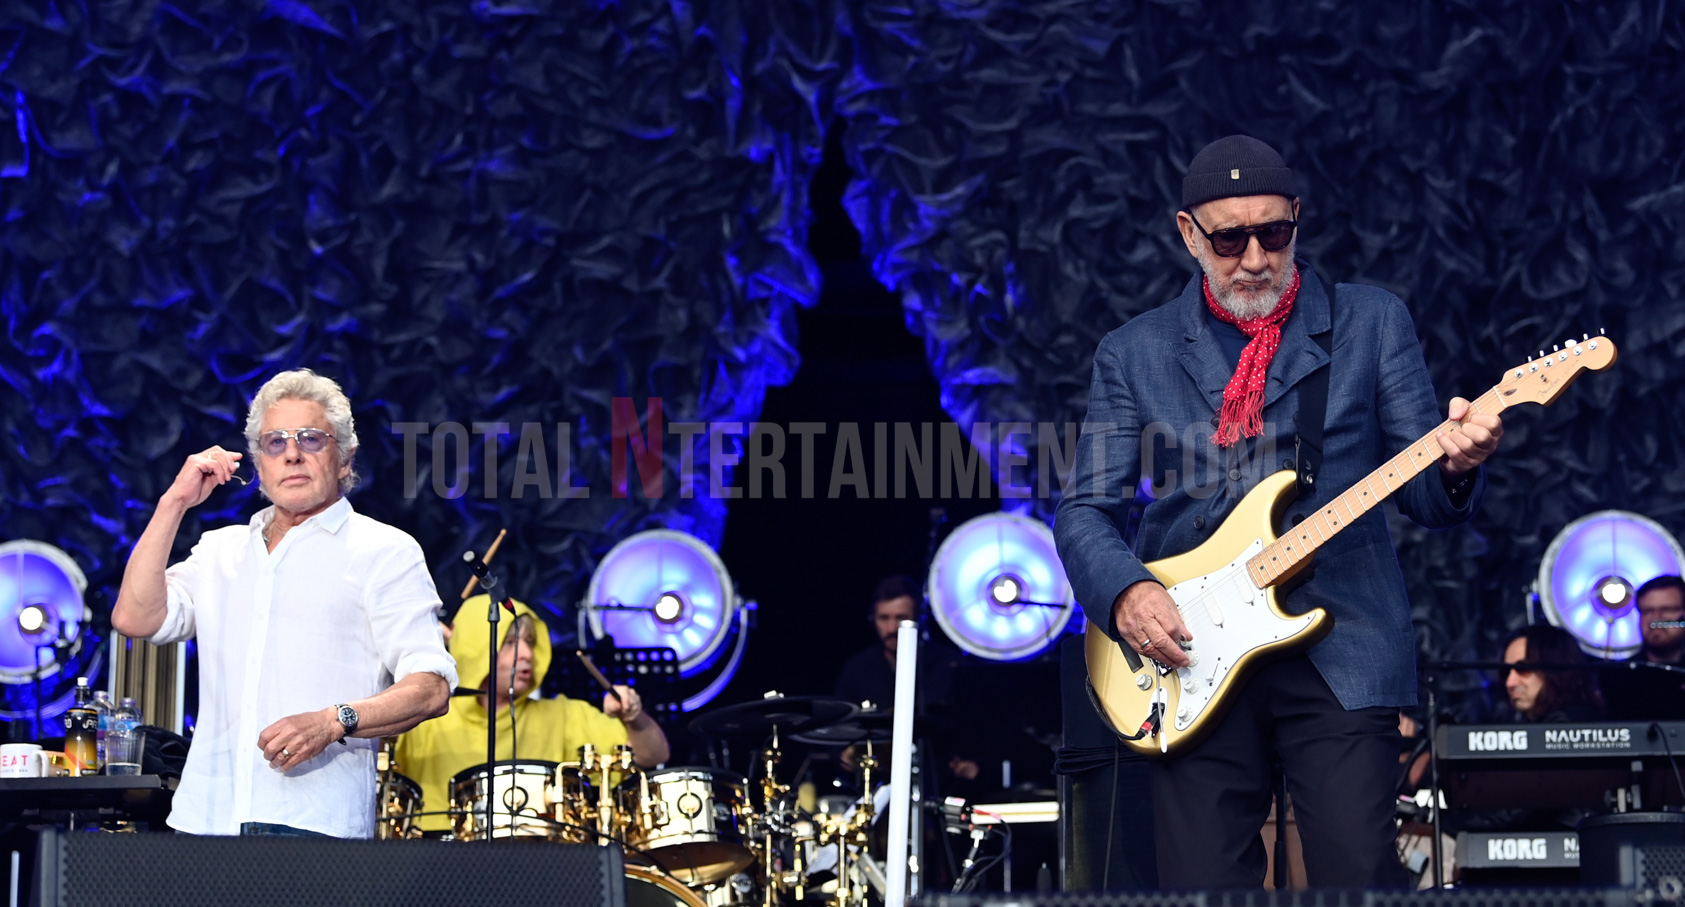 Live Event, Music, Stephen Farrell, Totalntertainment, The Who, Roger Daltry, Pete Townsend, Wigan, Music Photography